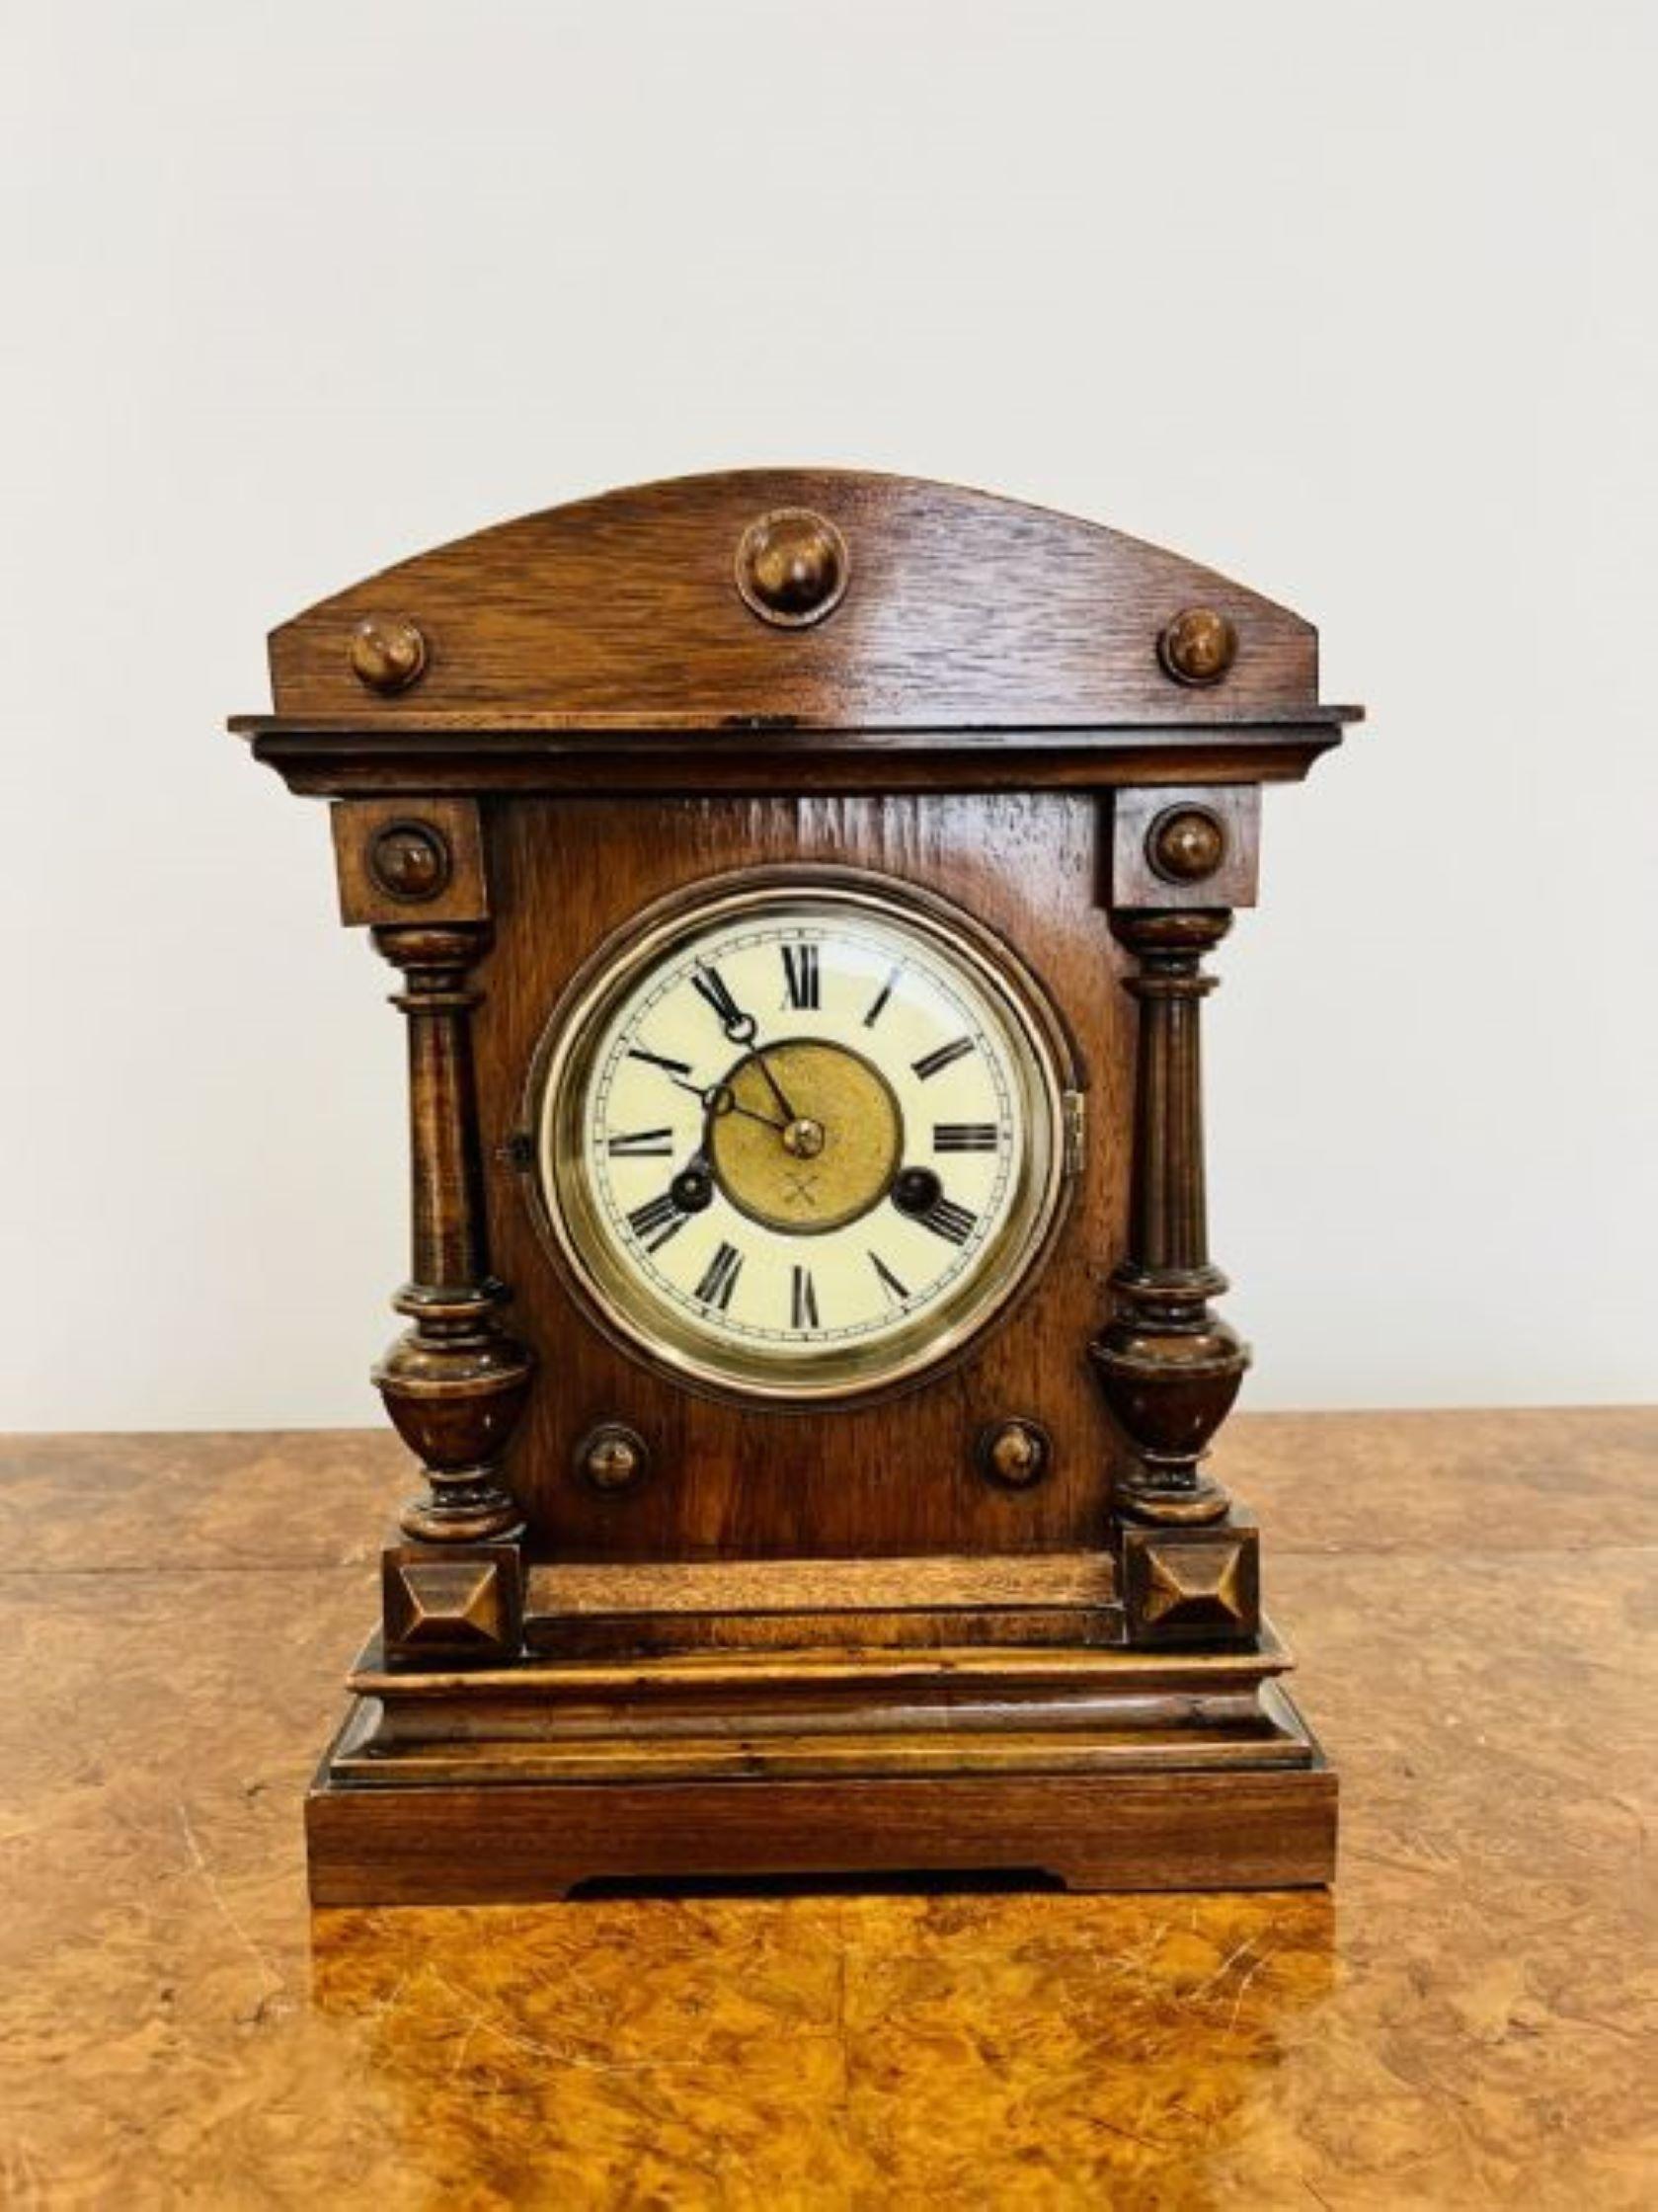 Antique Victorian walnut mantle clock having a circular dial with an 8 day movement striking the hour and half hour on a gong in a carved walnut case
Please note all of our clocks are serviced prior to delivery we do advise this can take between 2-8